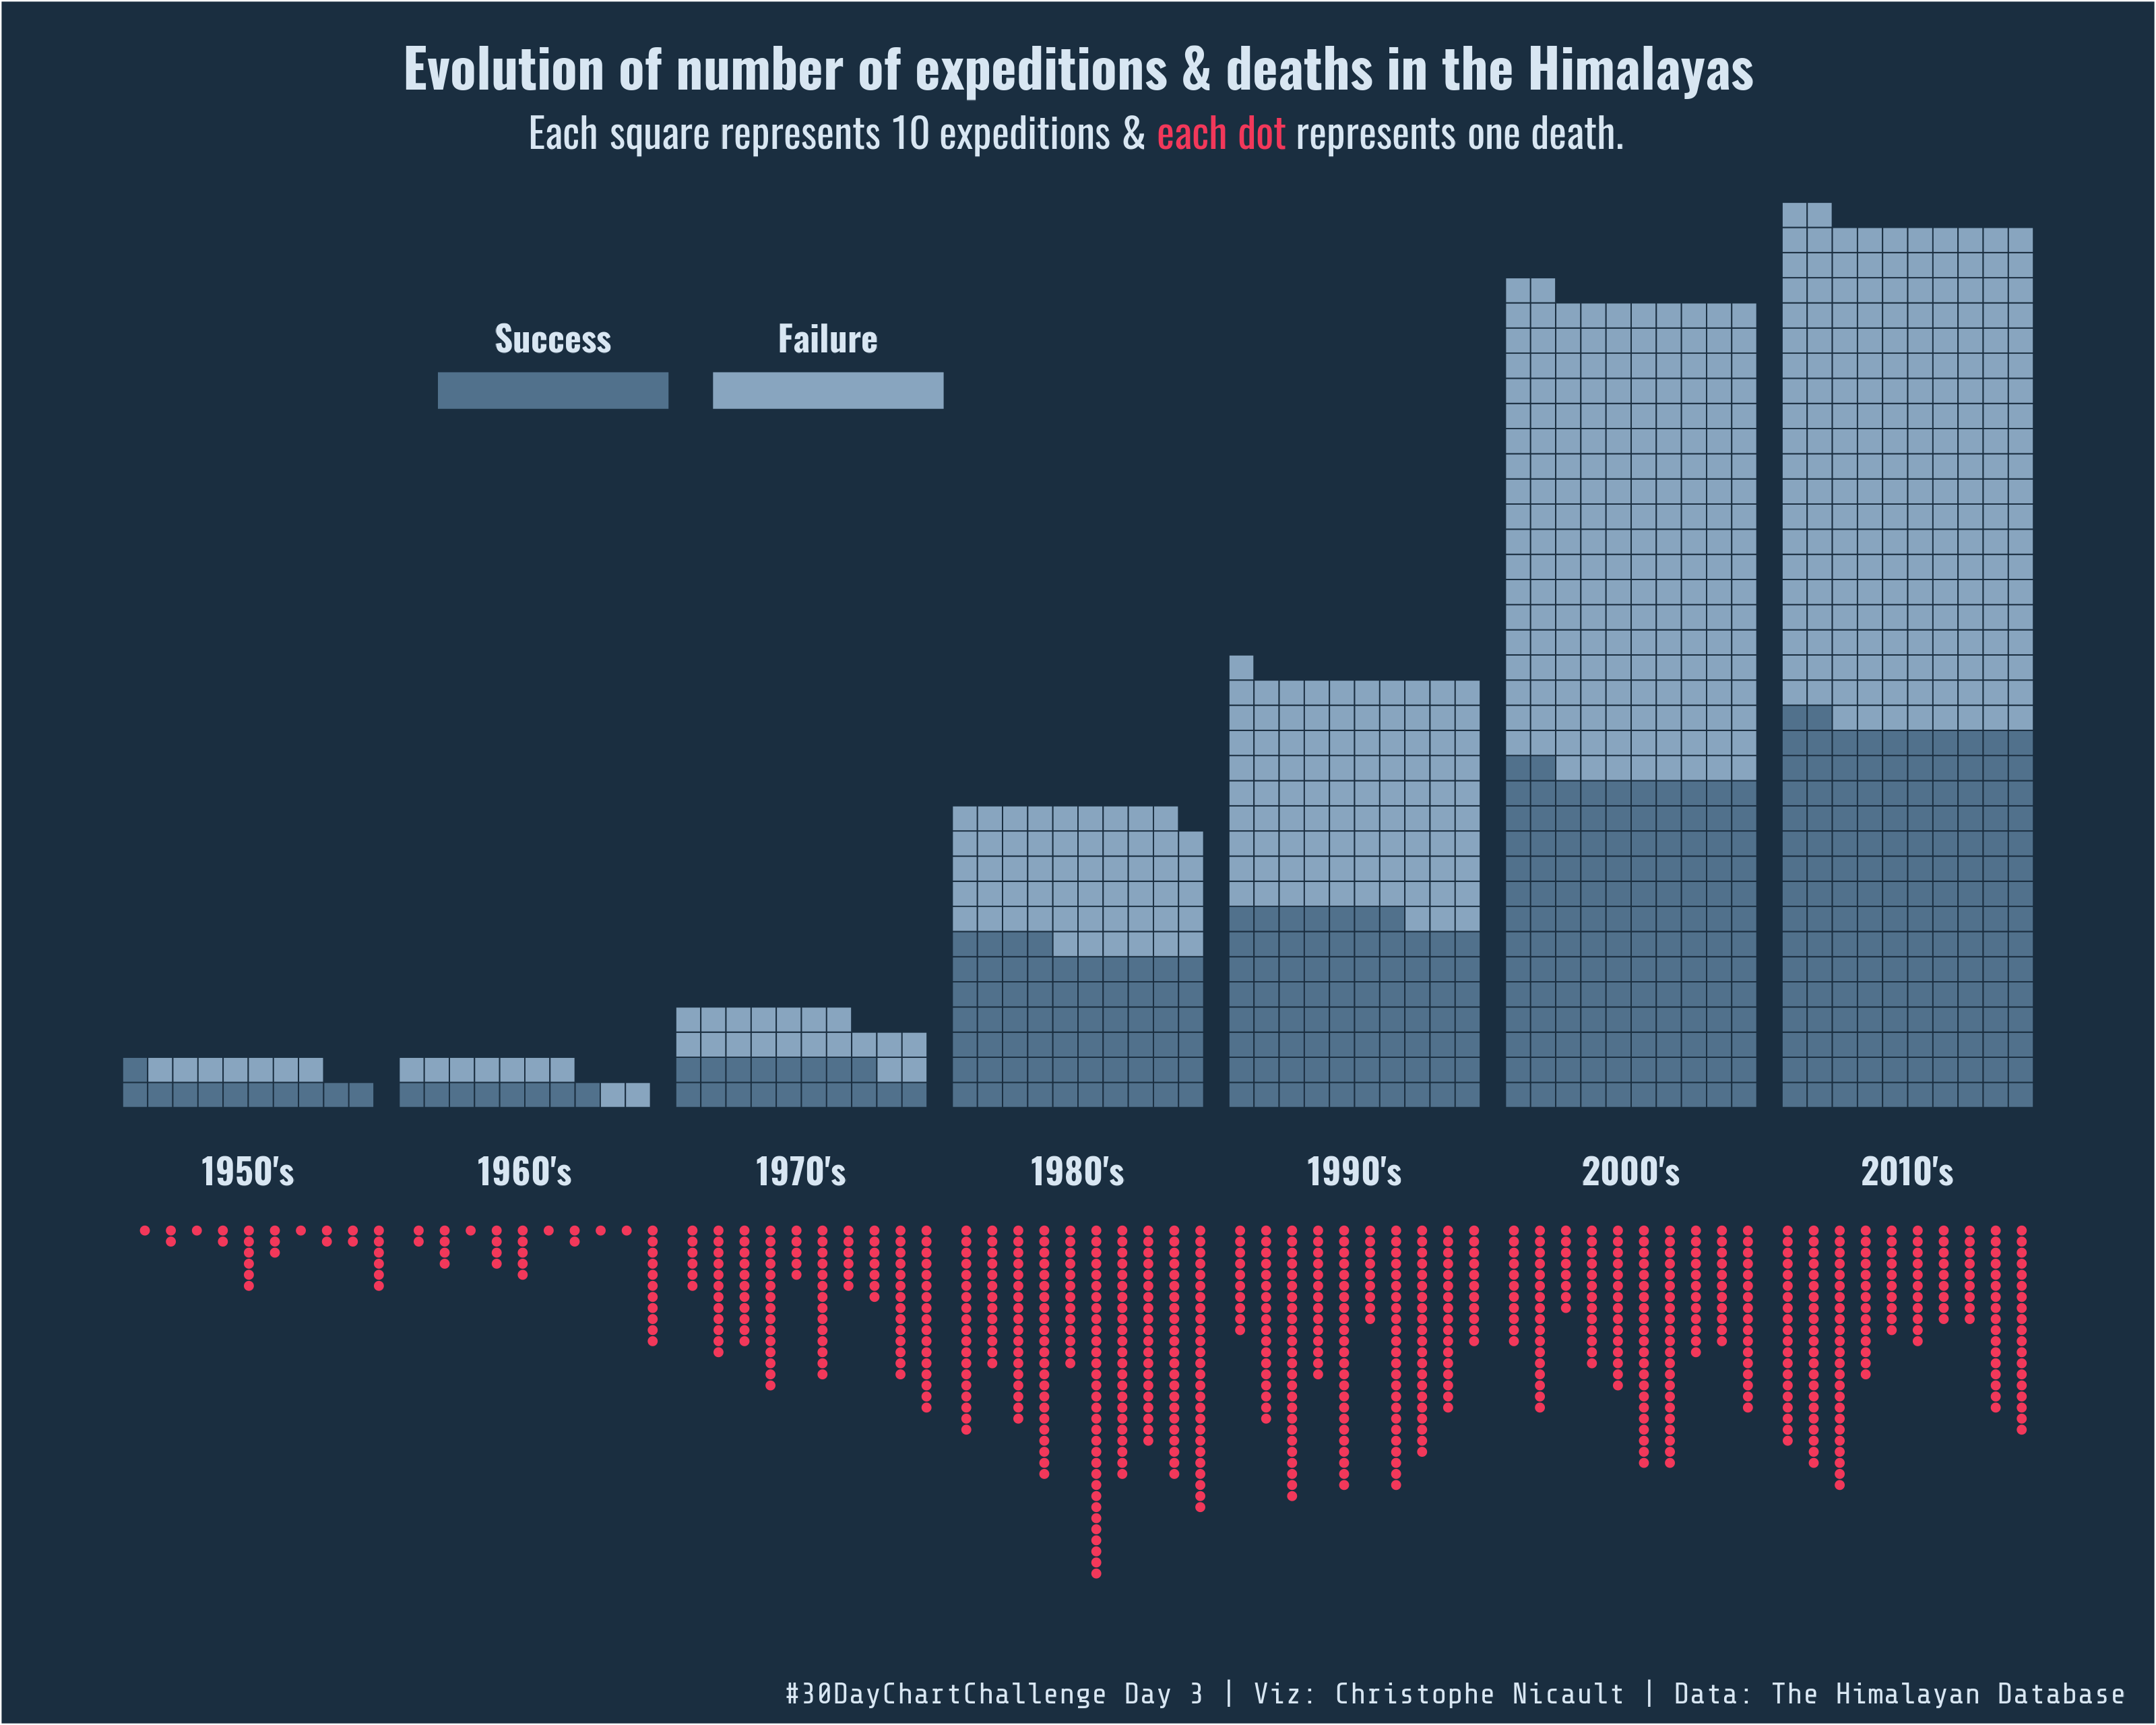 expeditions & deaths in the Himalayas